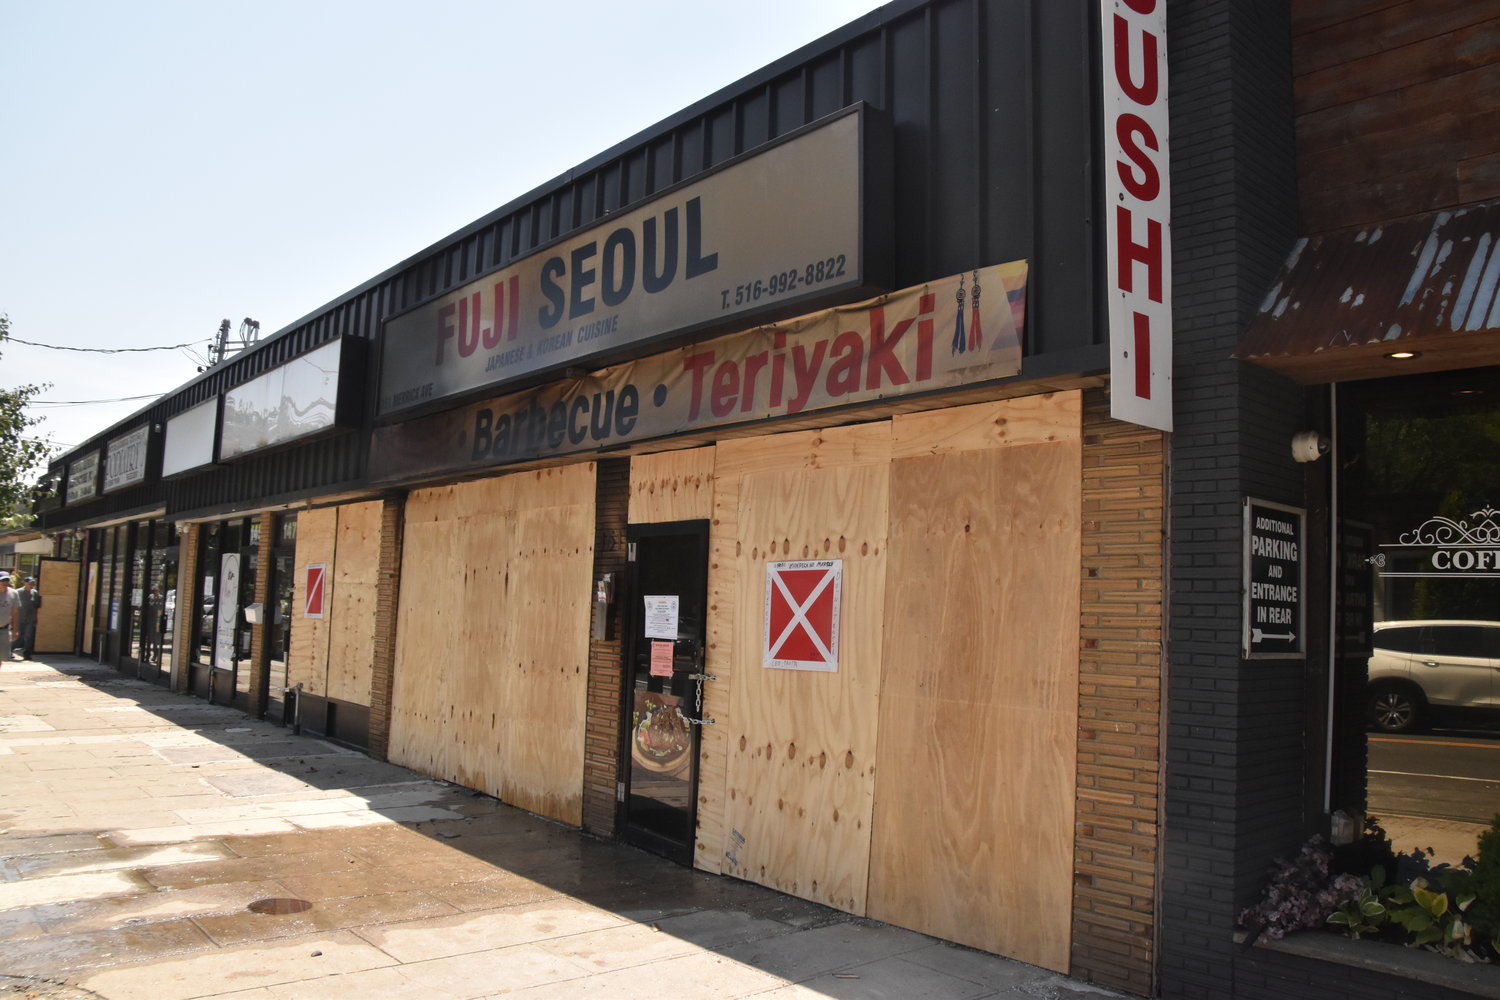 Although the fire was mostly contained to Fuji Seoul, it did spread one storefront south, the Merrick Fire Department said. Other businesses suffered smoke damage.